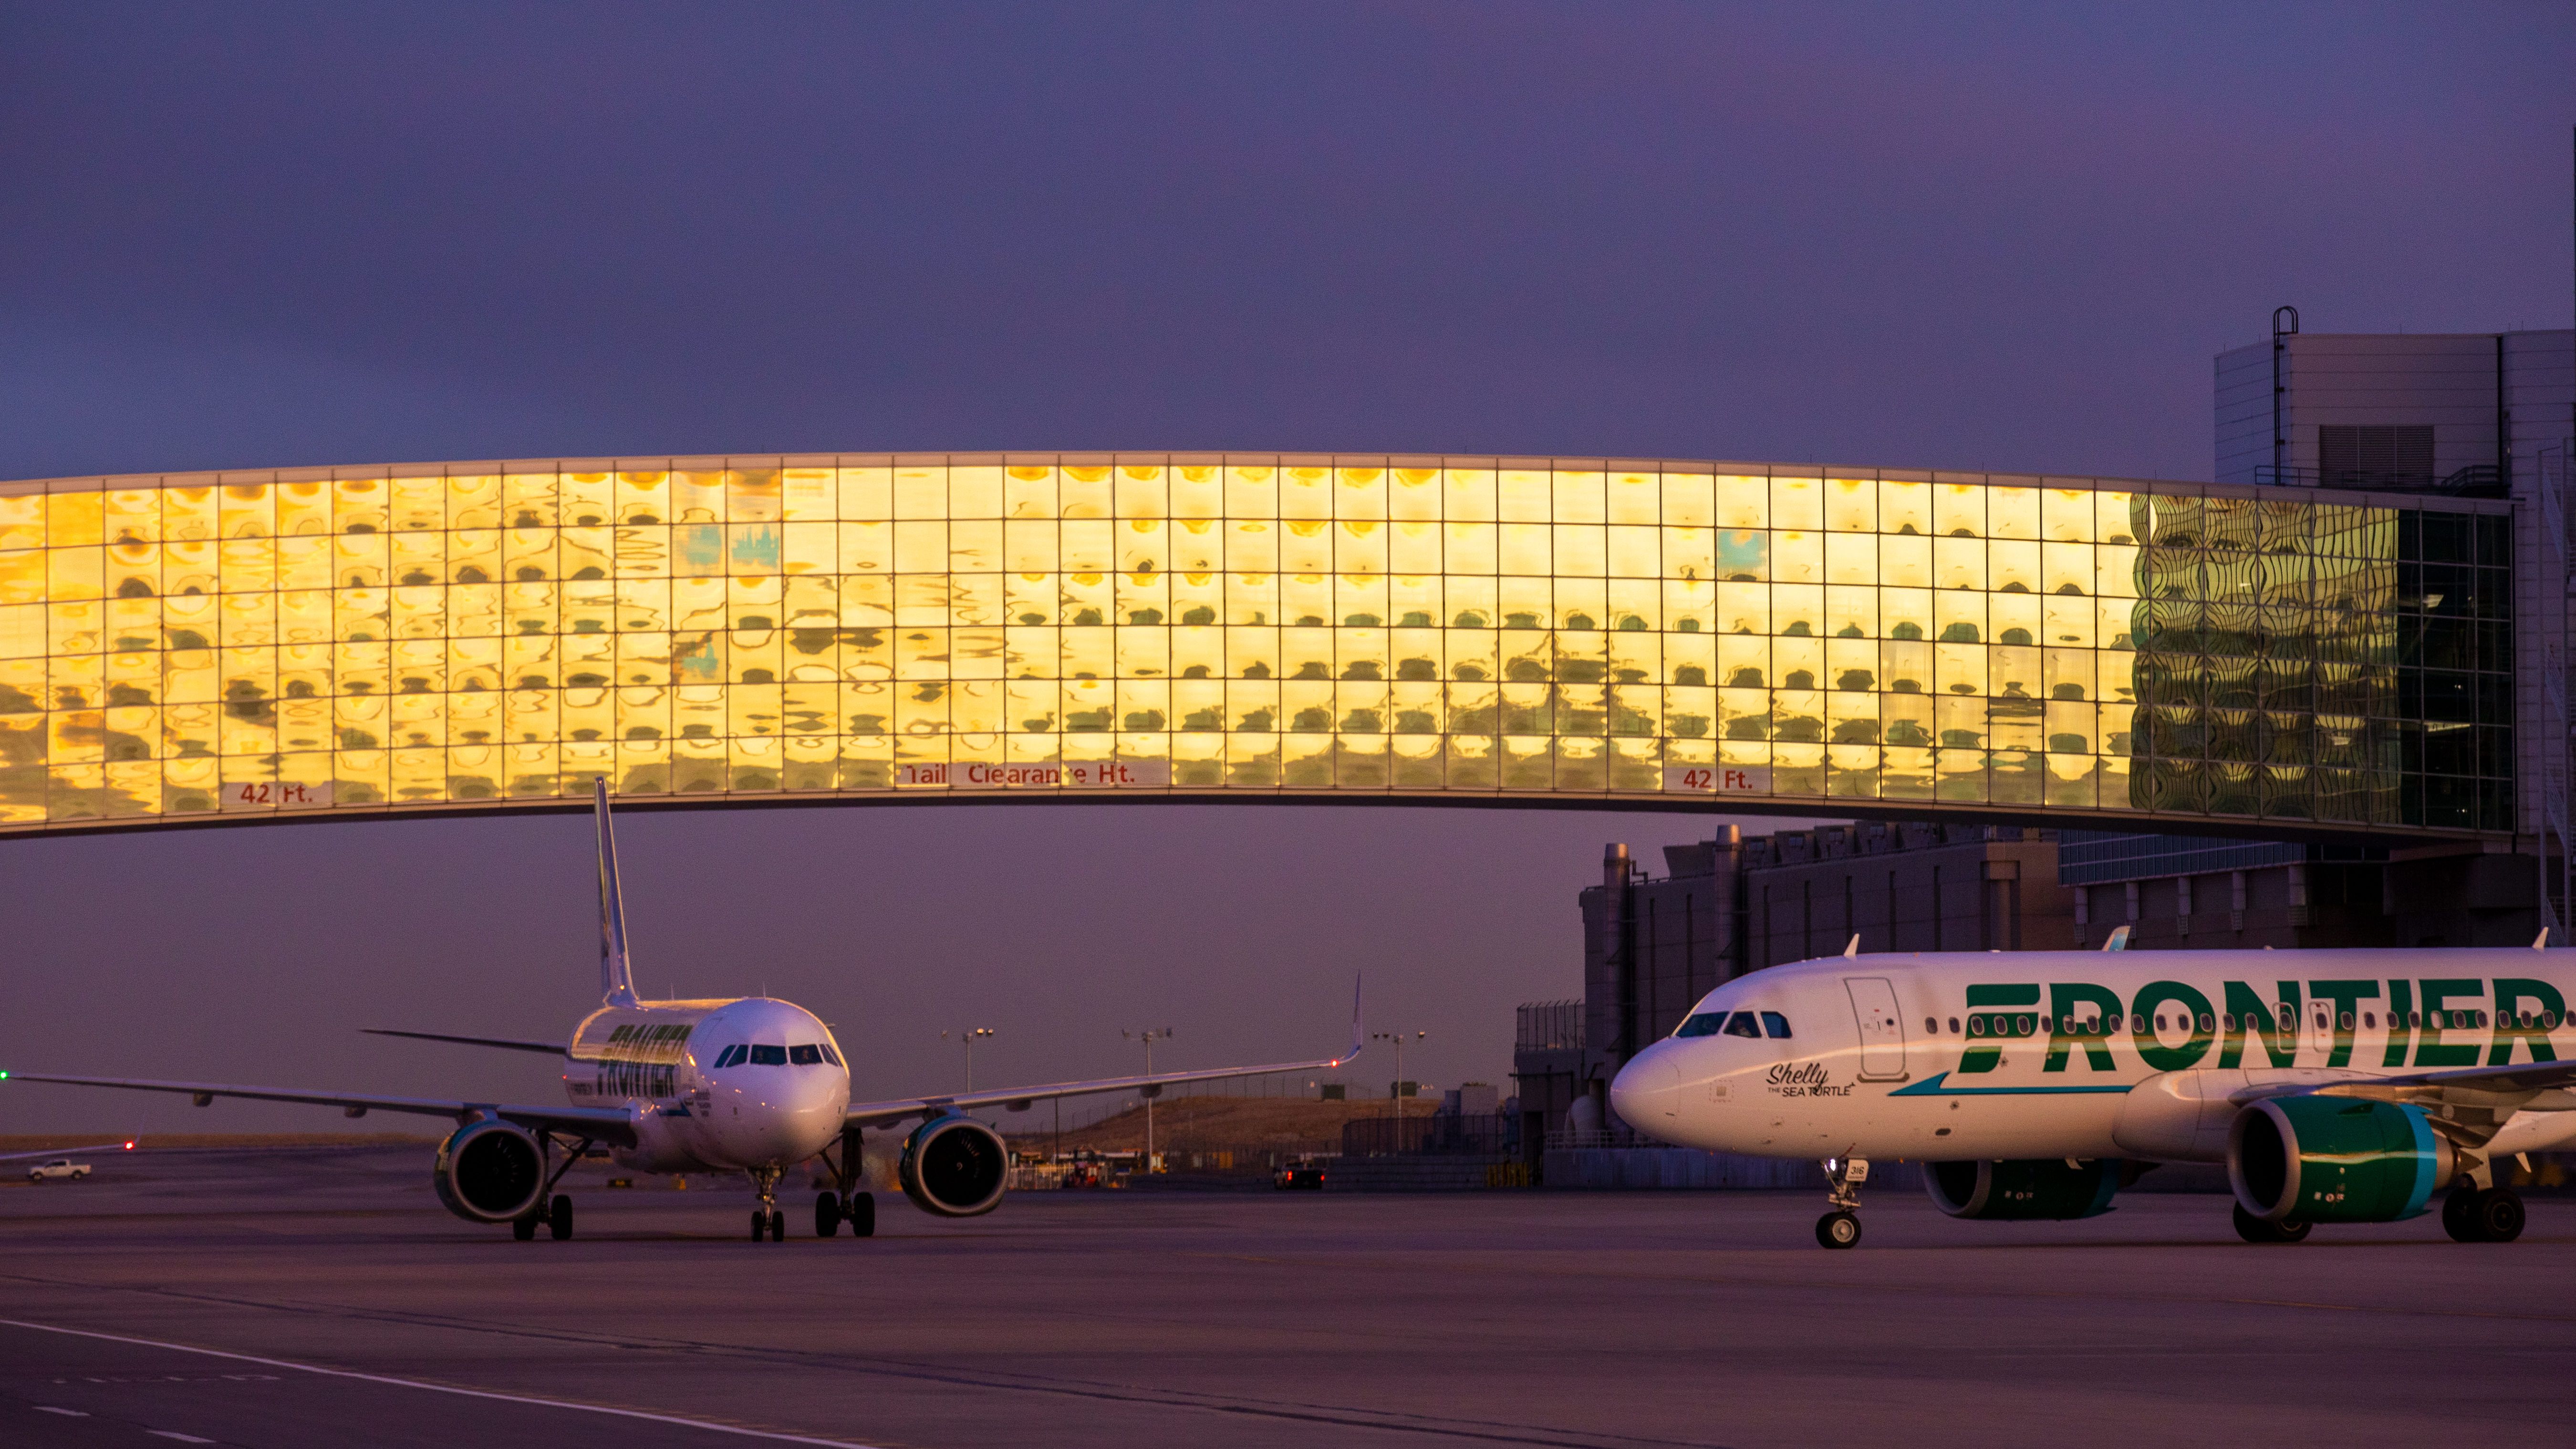 Denver airport at sunset with Frontier aircraft